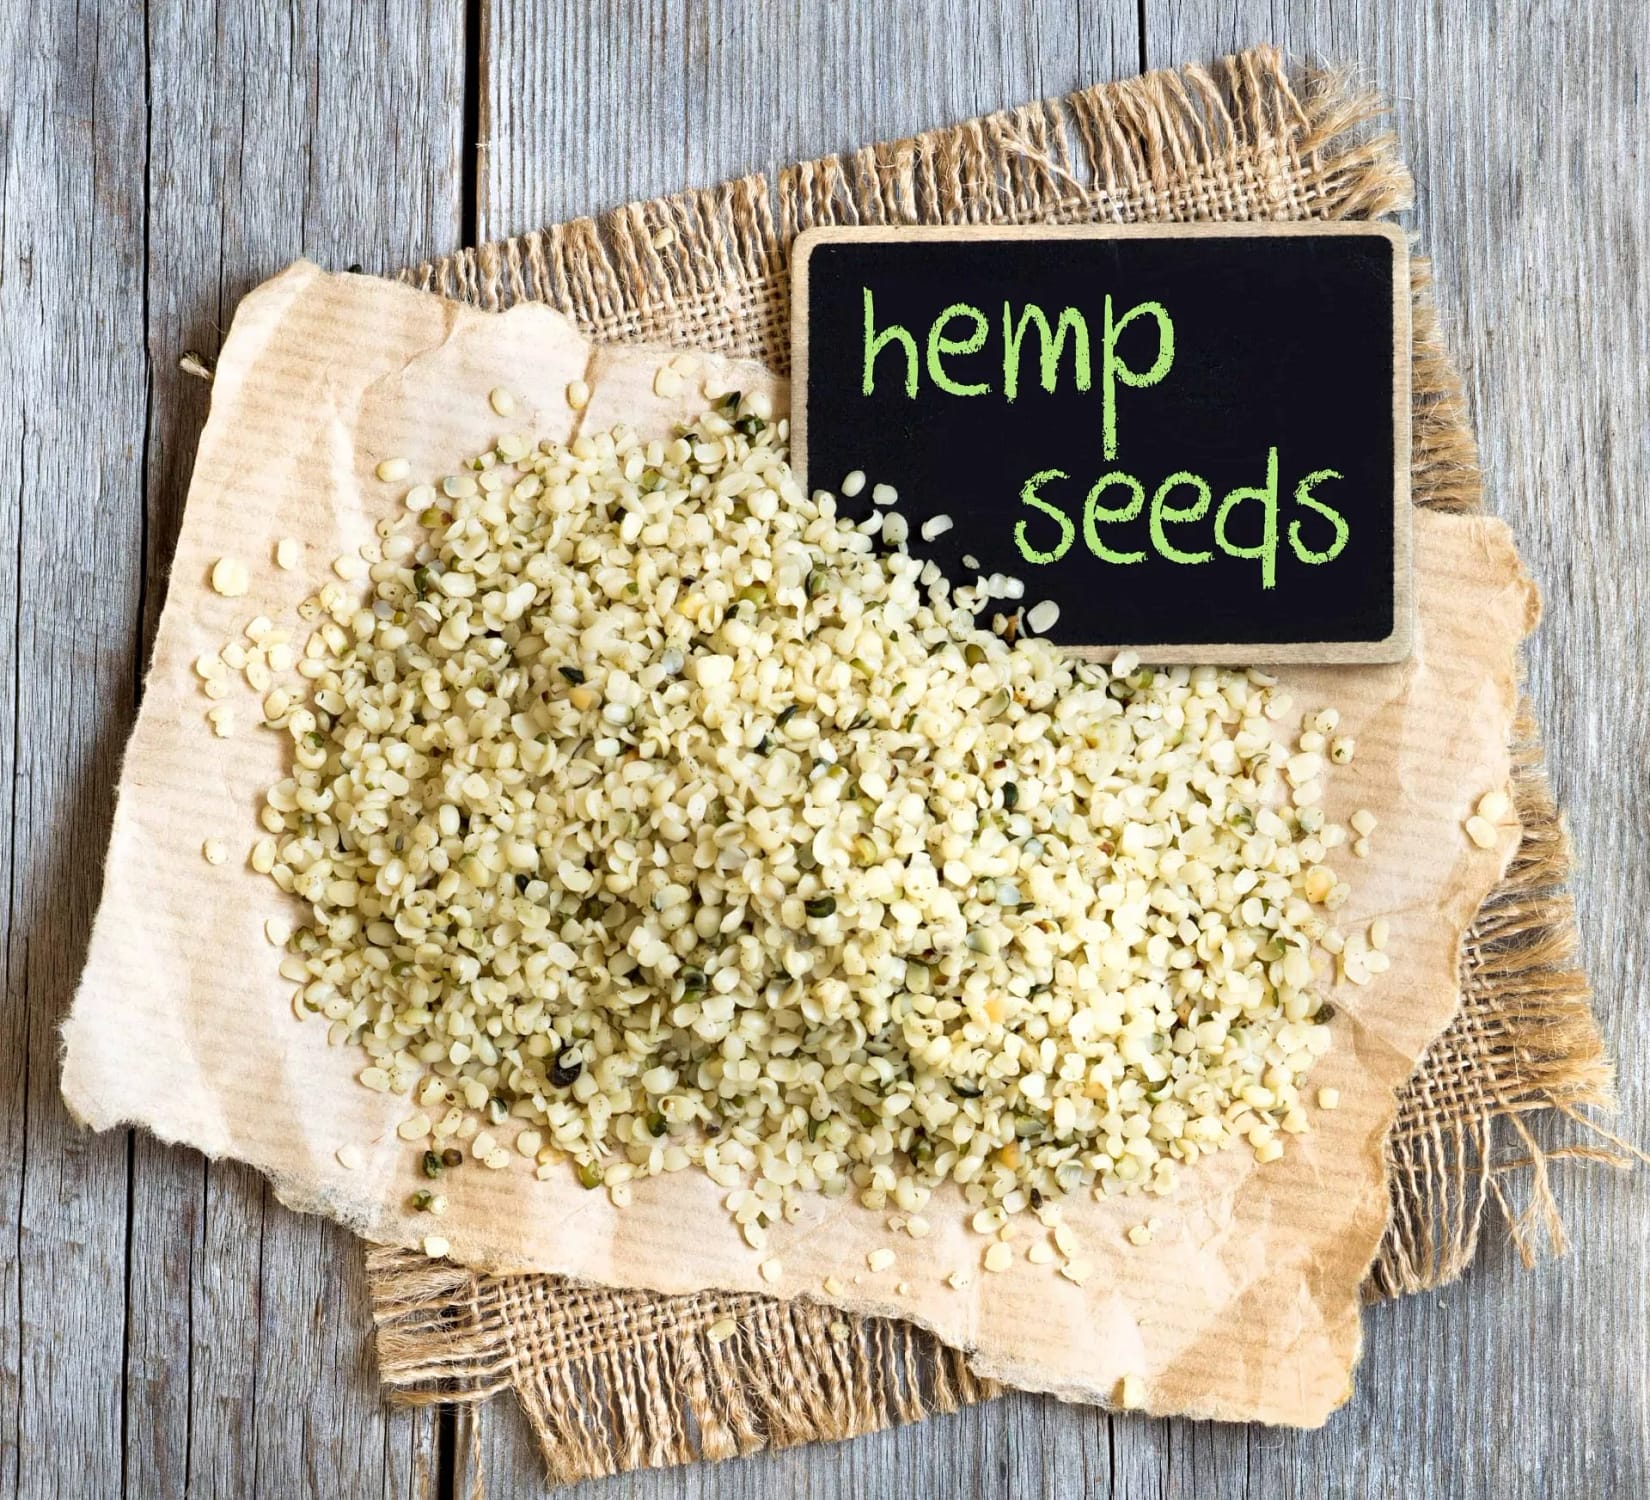 Hemp seeds on wooden table with small chalkboard